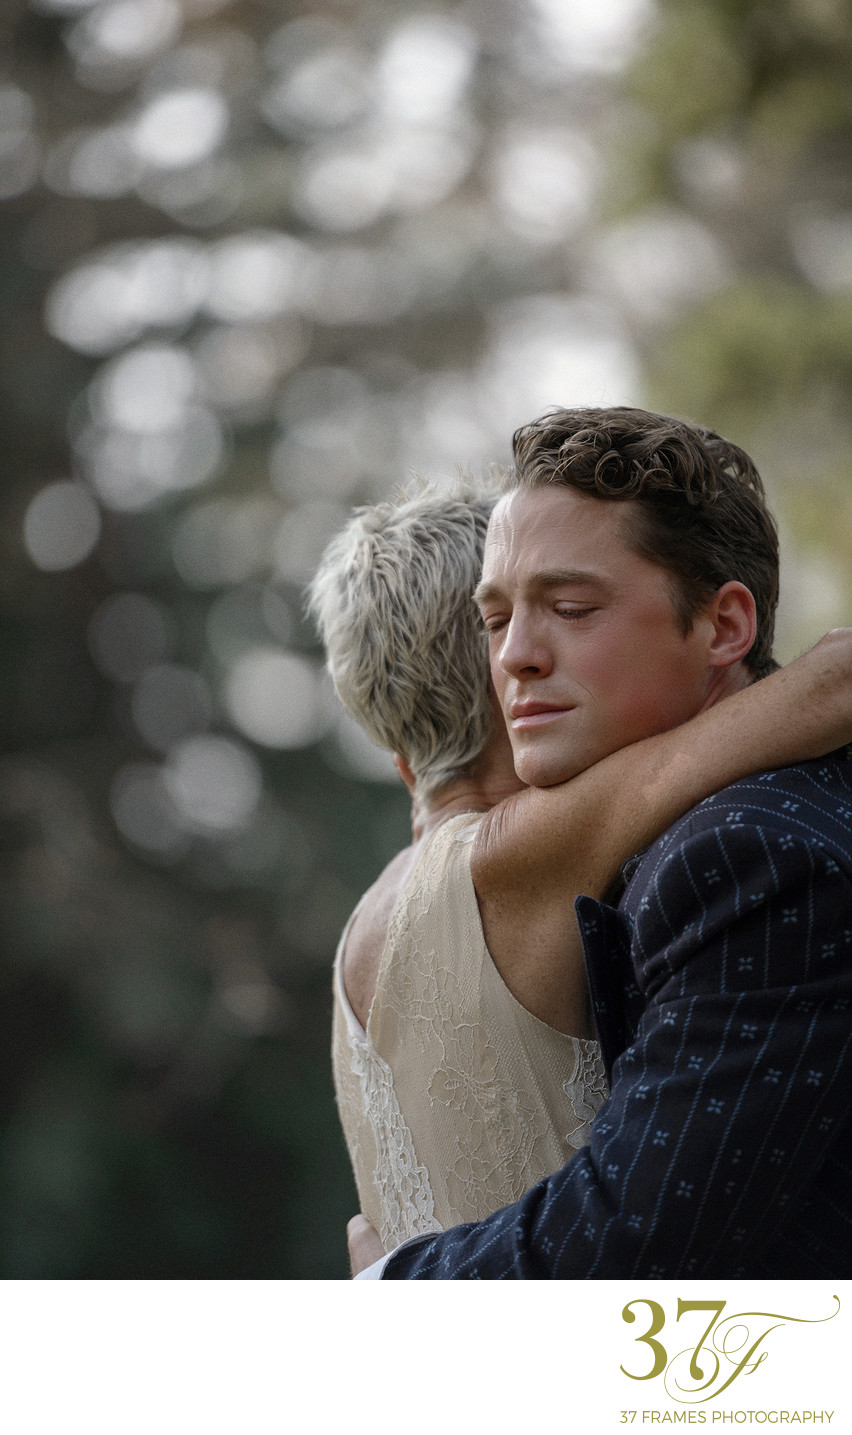 Sweet Wedding Day Moment That Will Make You Teary-Eyed